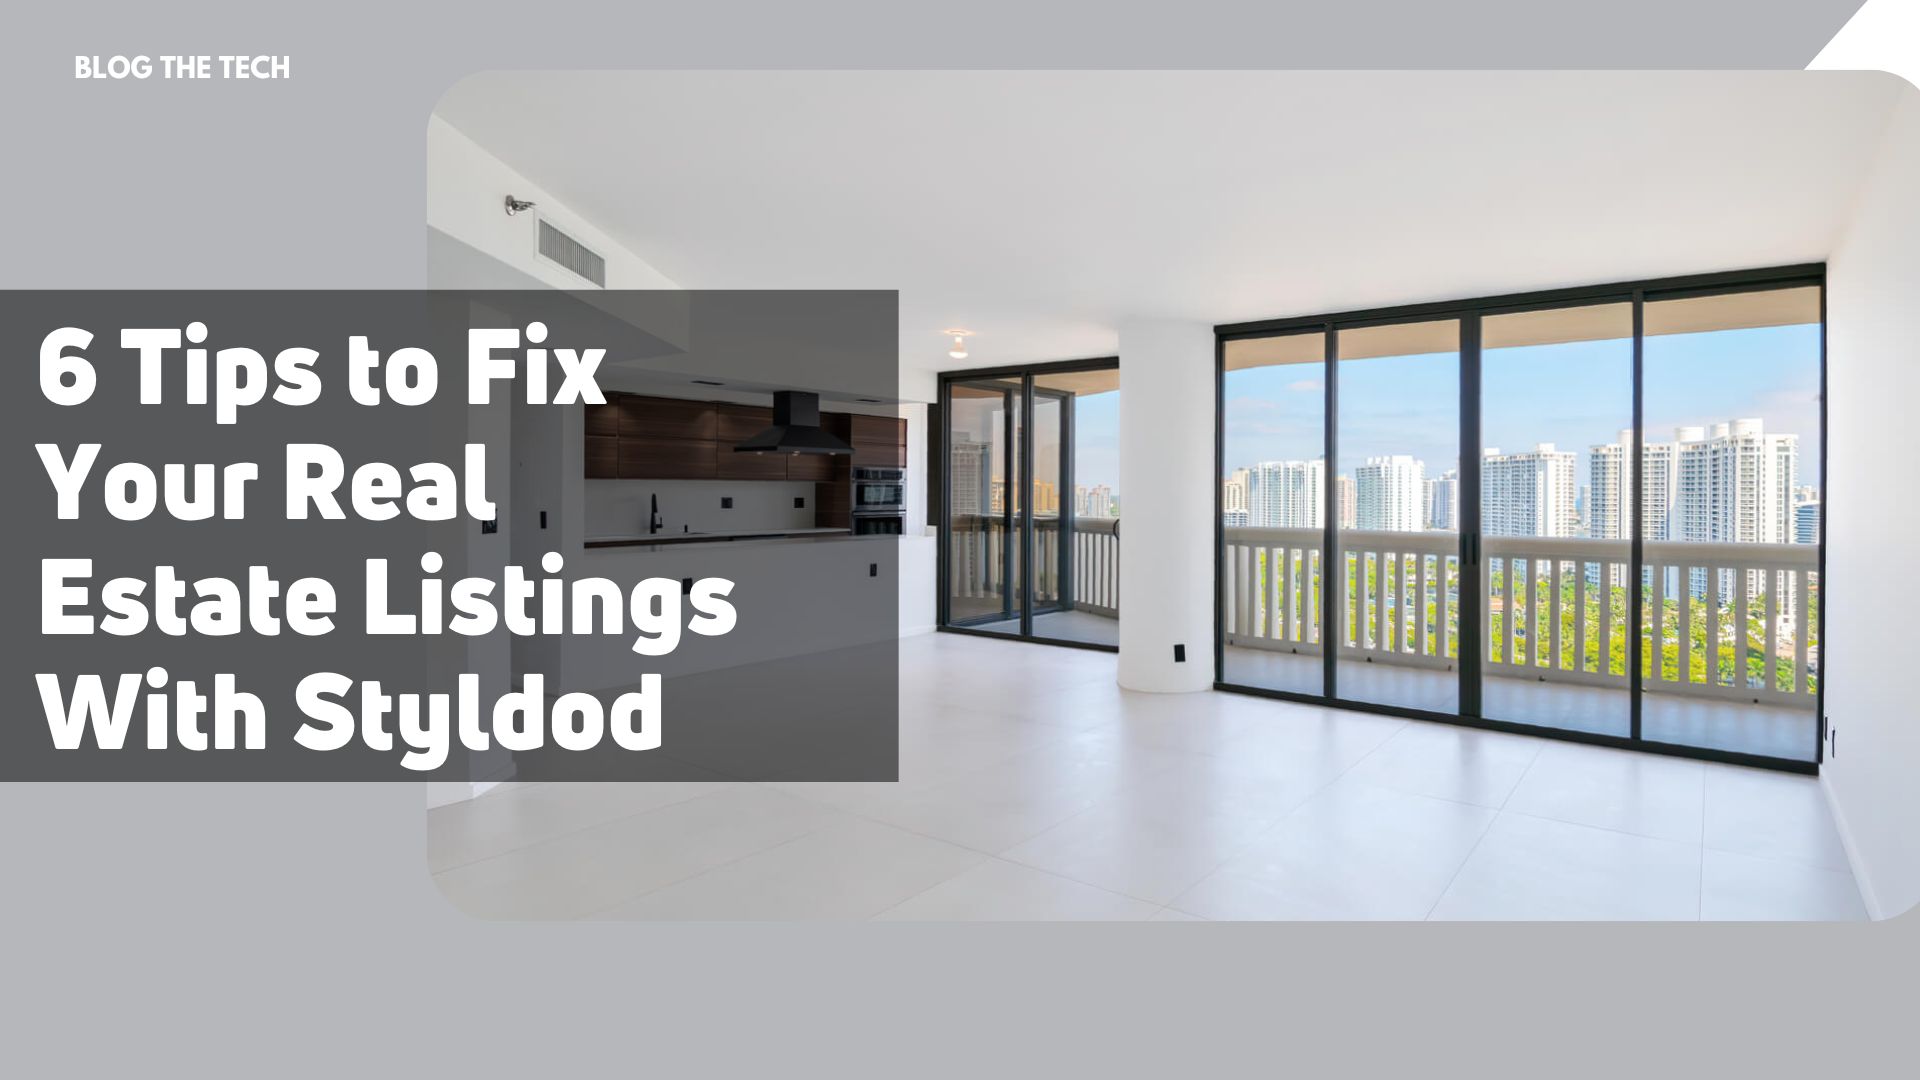 6 Tips to Fix Your Real Estate Listings With Styldod